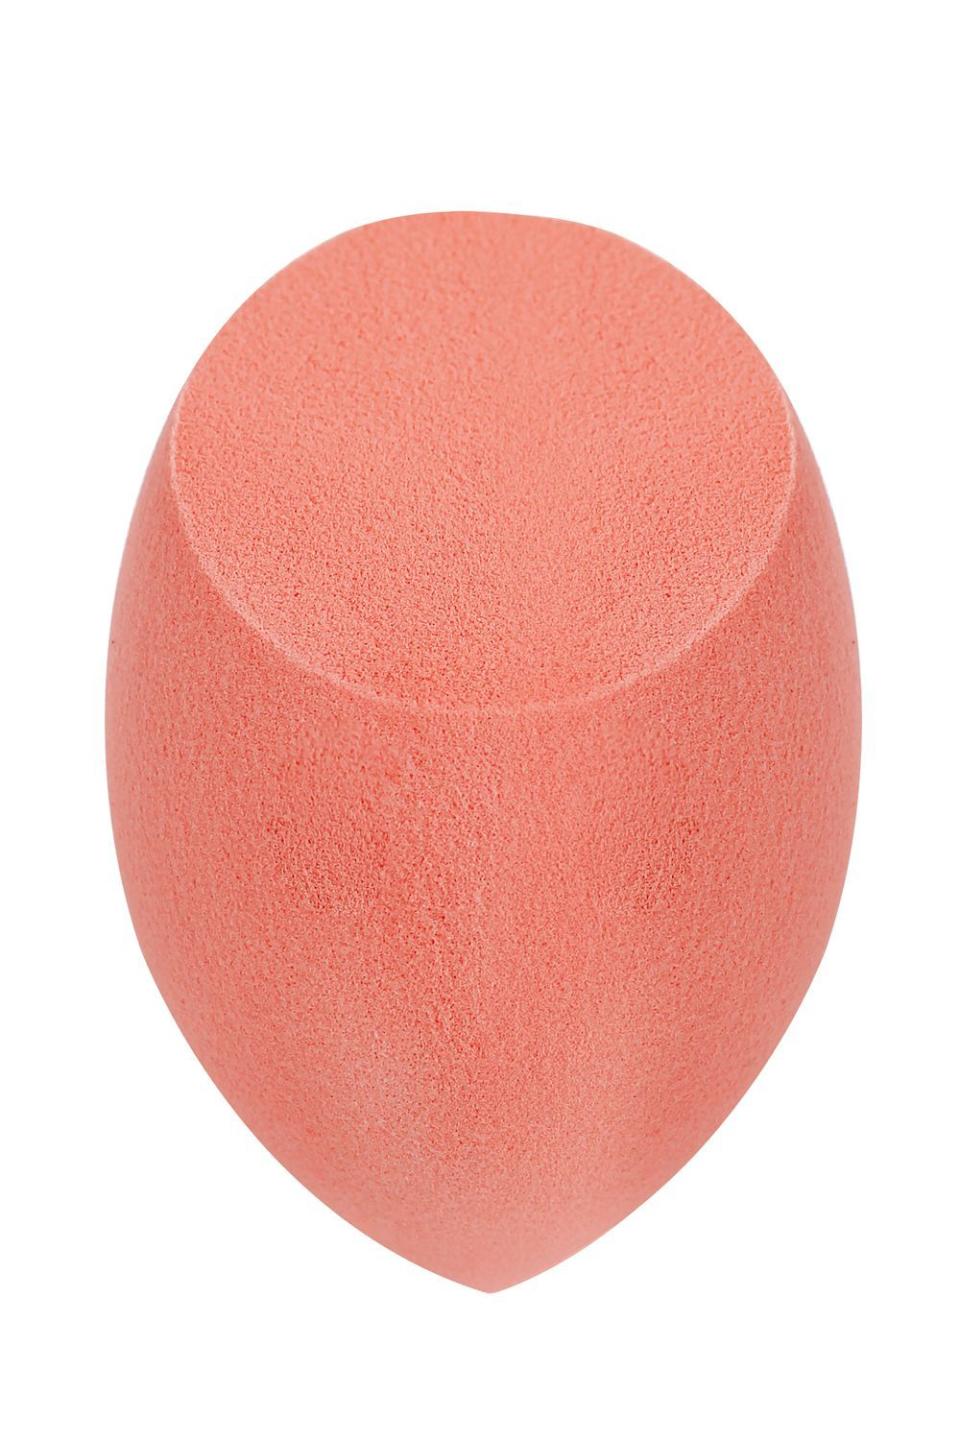 8) Real Techniques Miracle Body Complexion Sponge